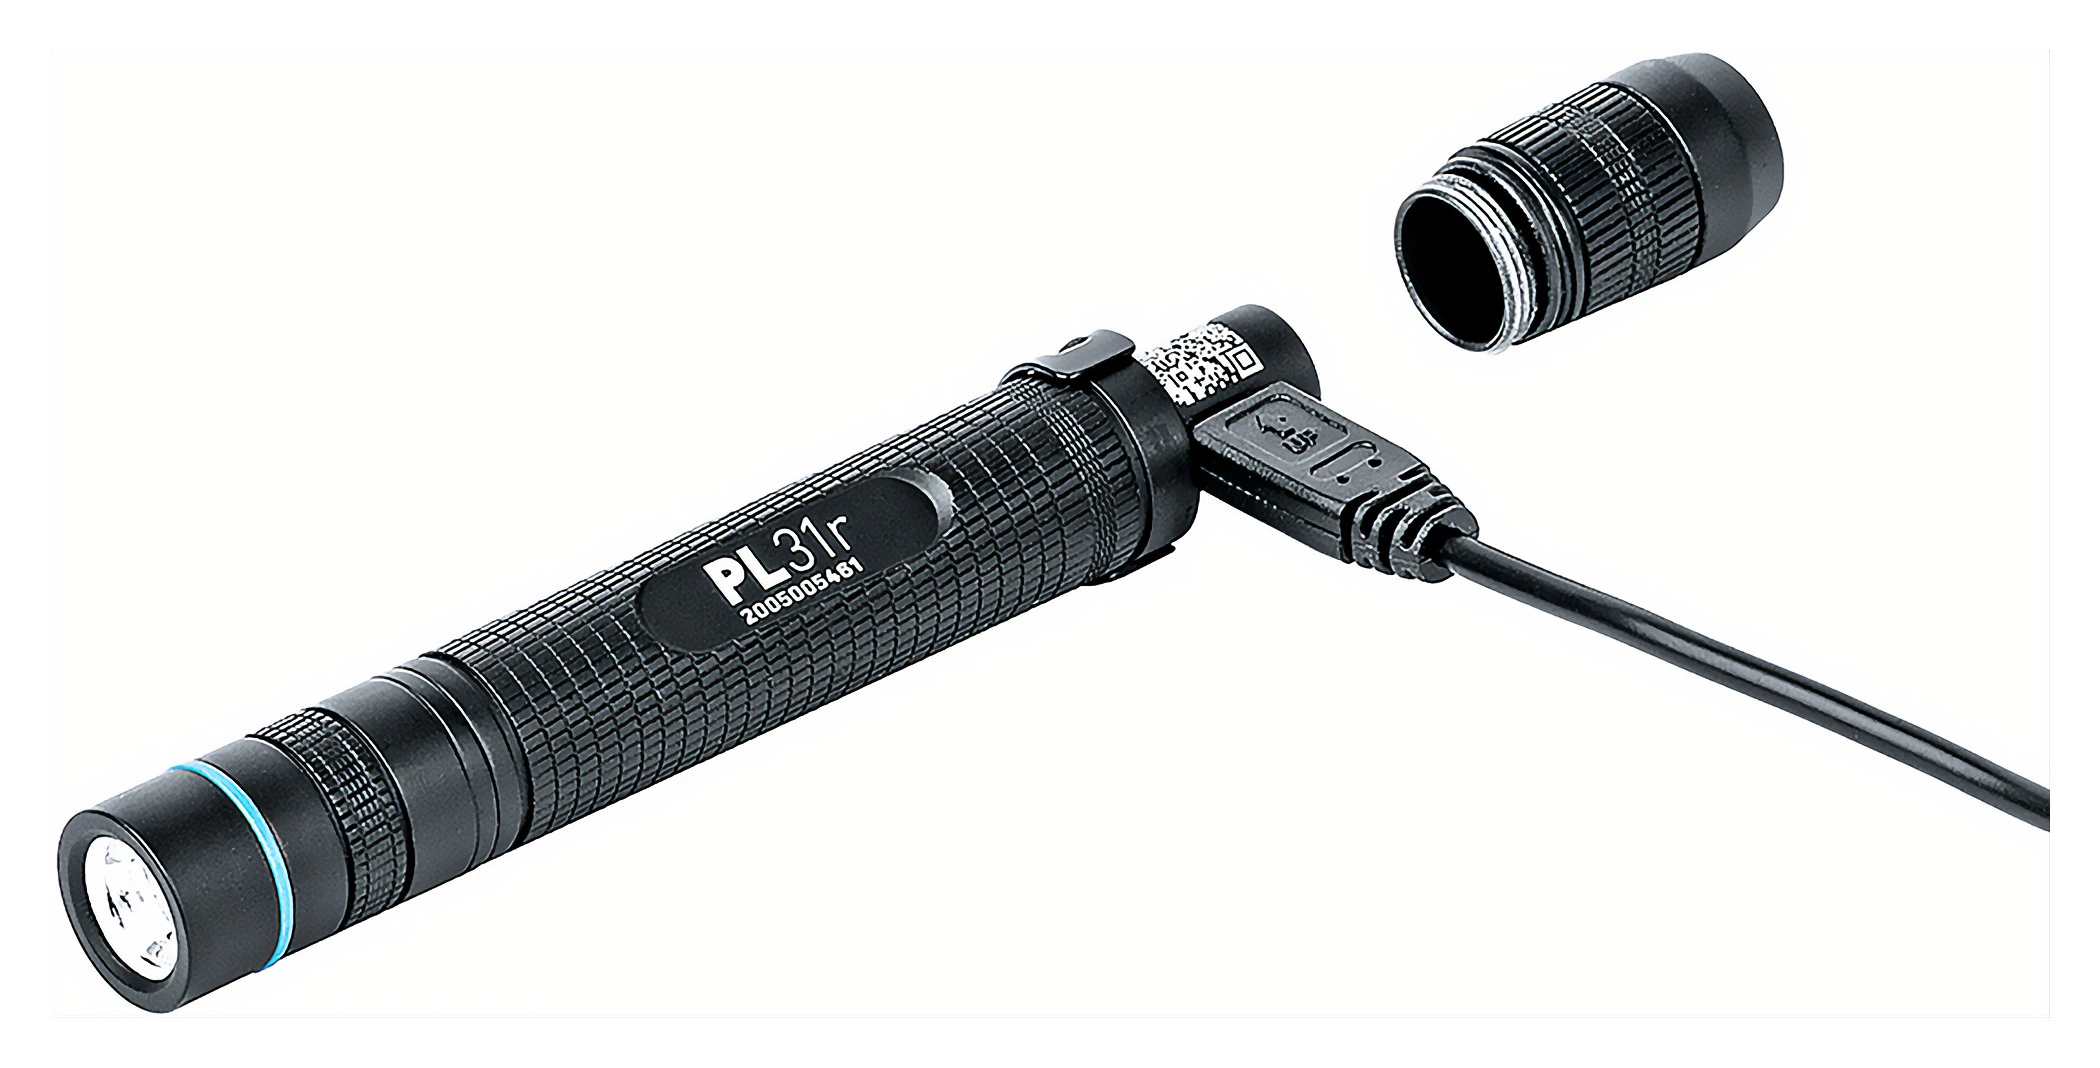 WALTHER PL31R LED LIGHT